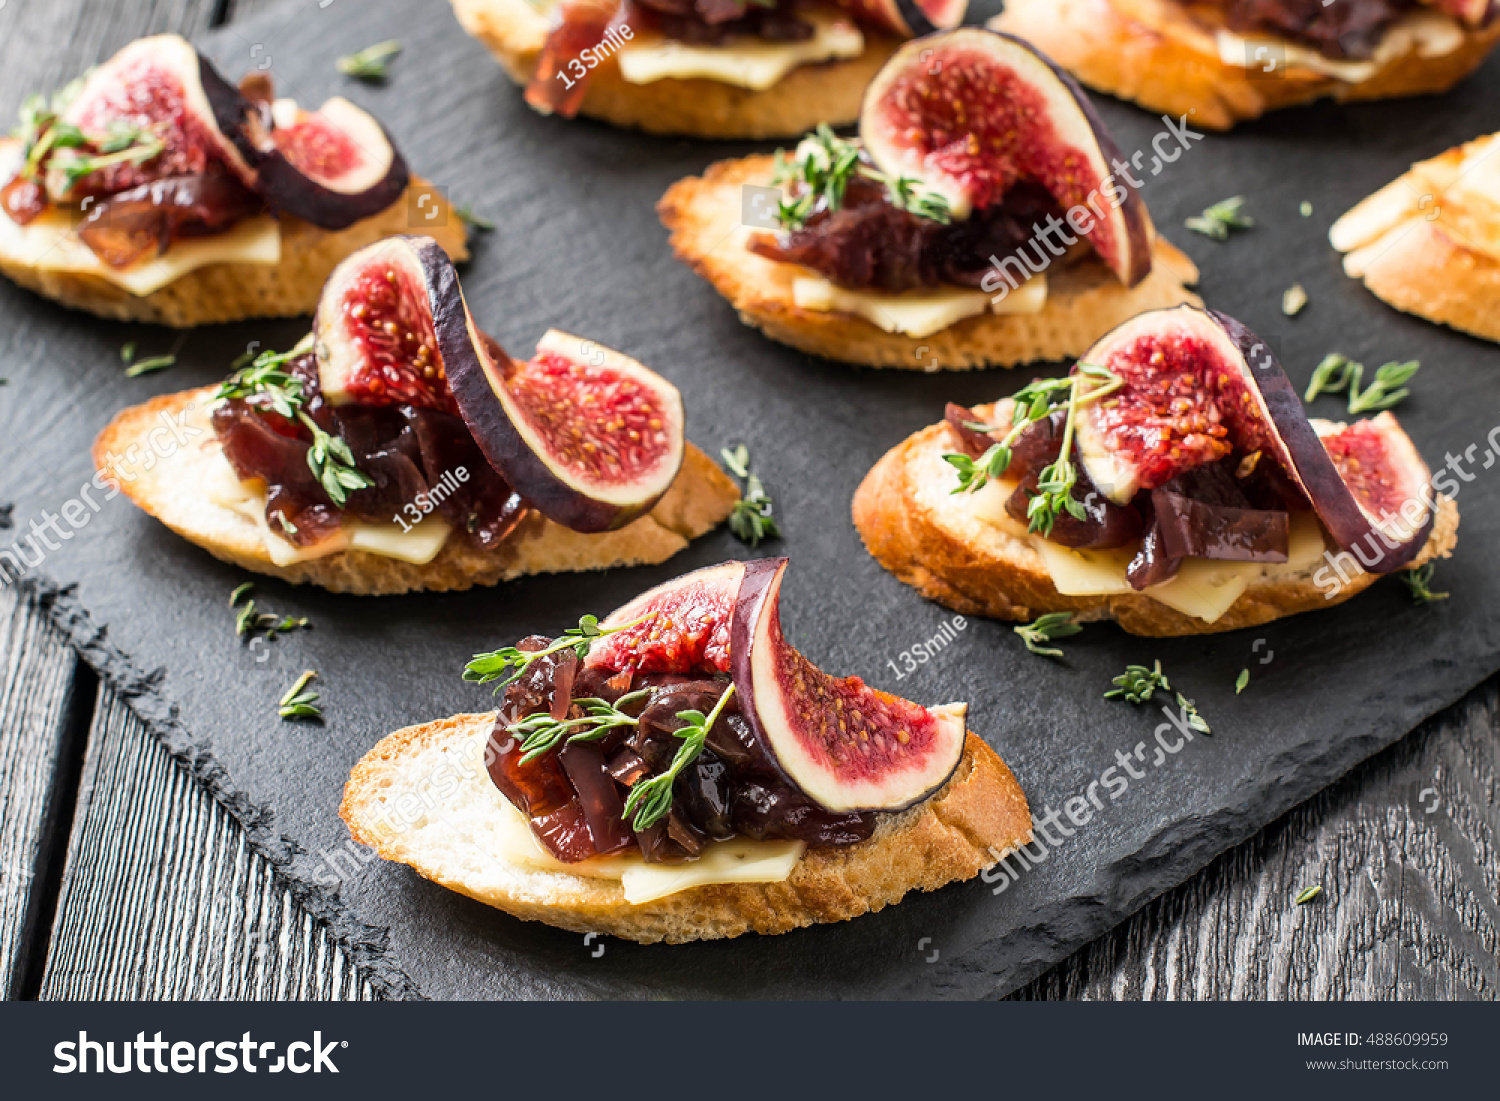 Canape or crostini with toasted baguette, cheese, onion jam, figs and fresh thyme on a slate board. Delicious appetizer, ideal as an aperitif. Selective focus #488609959